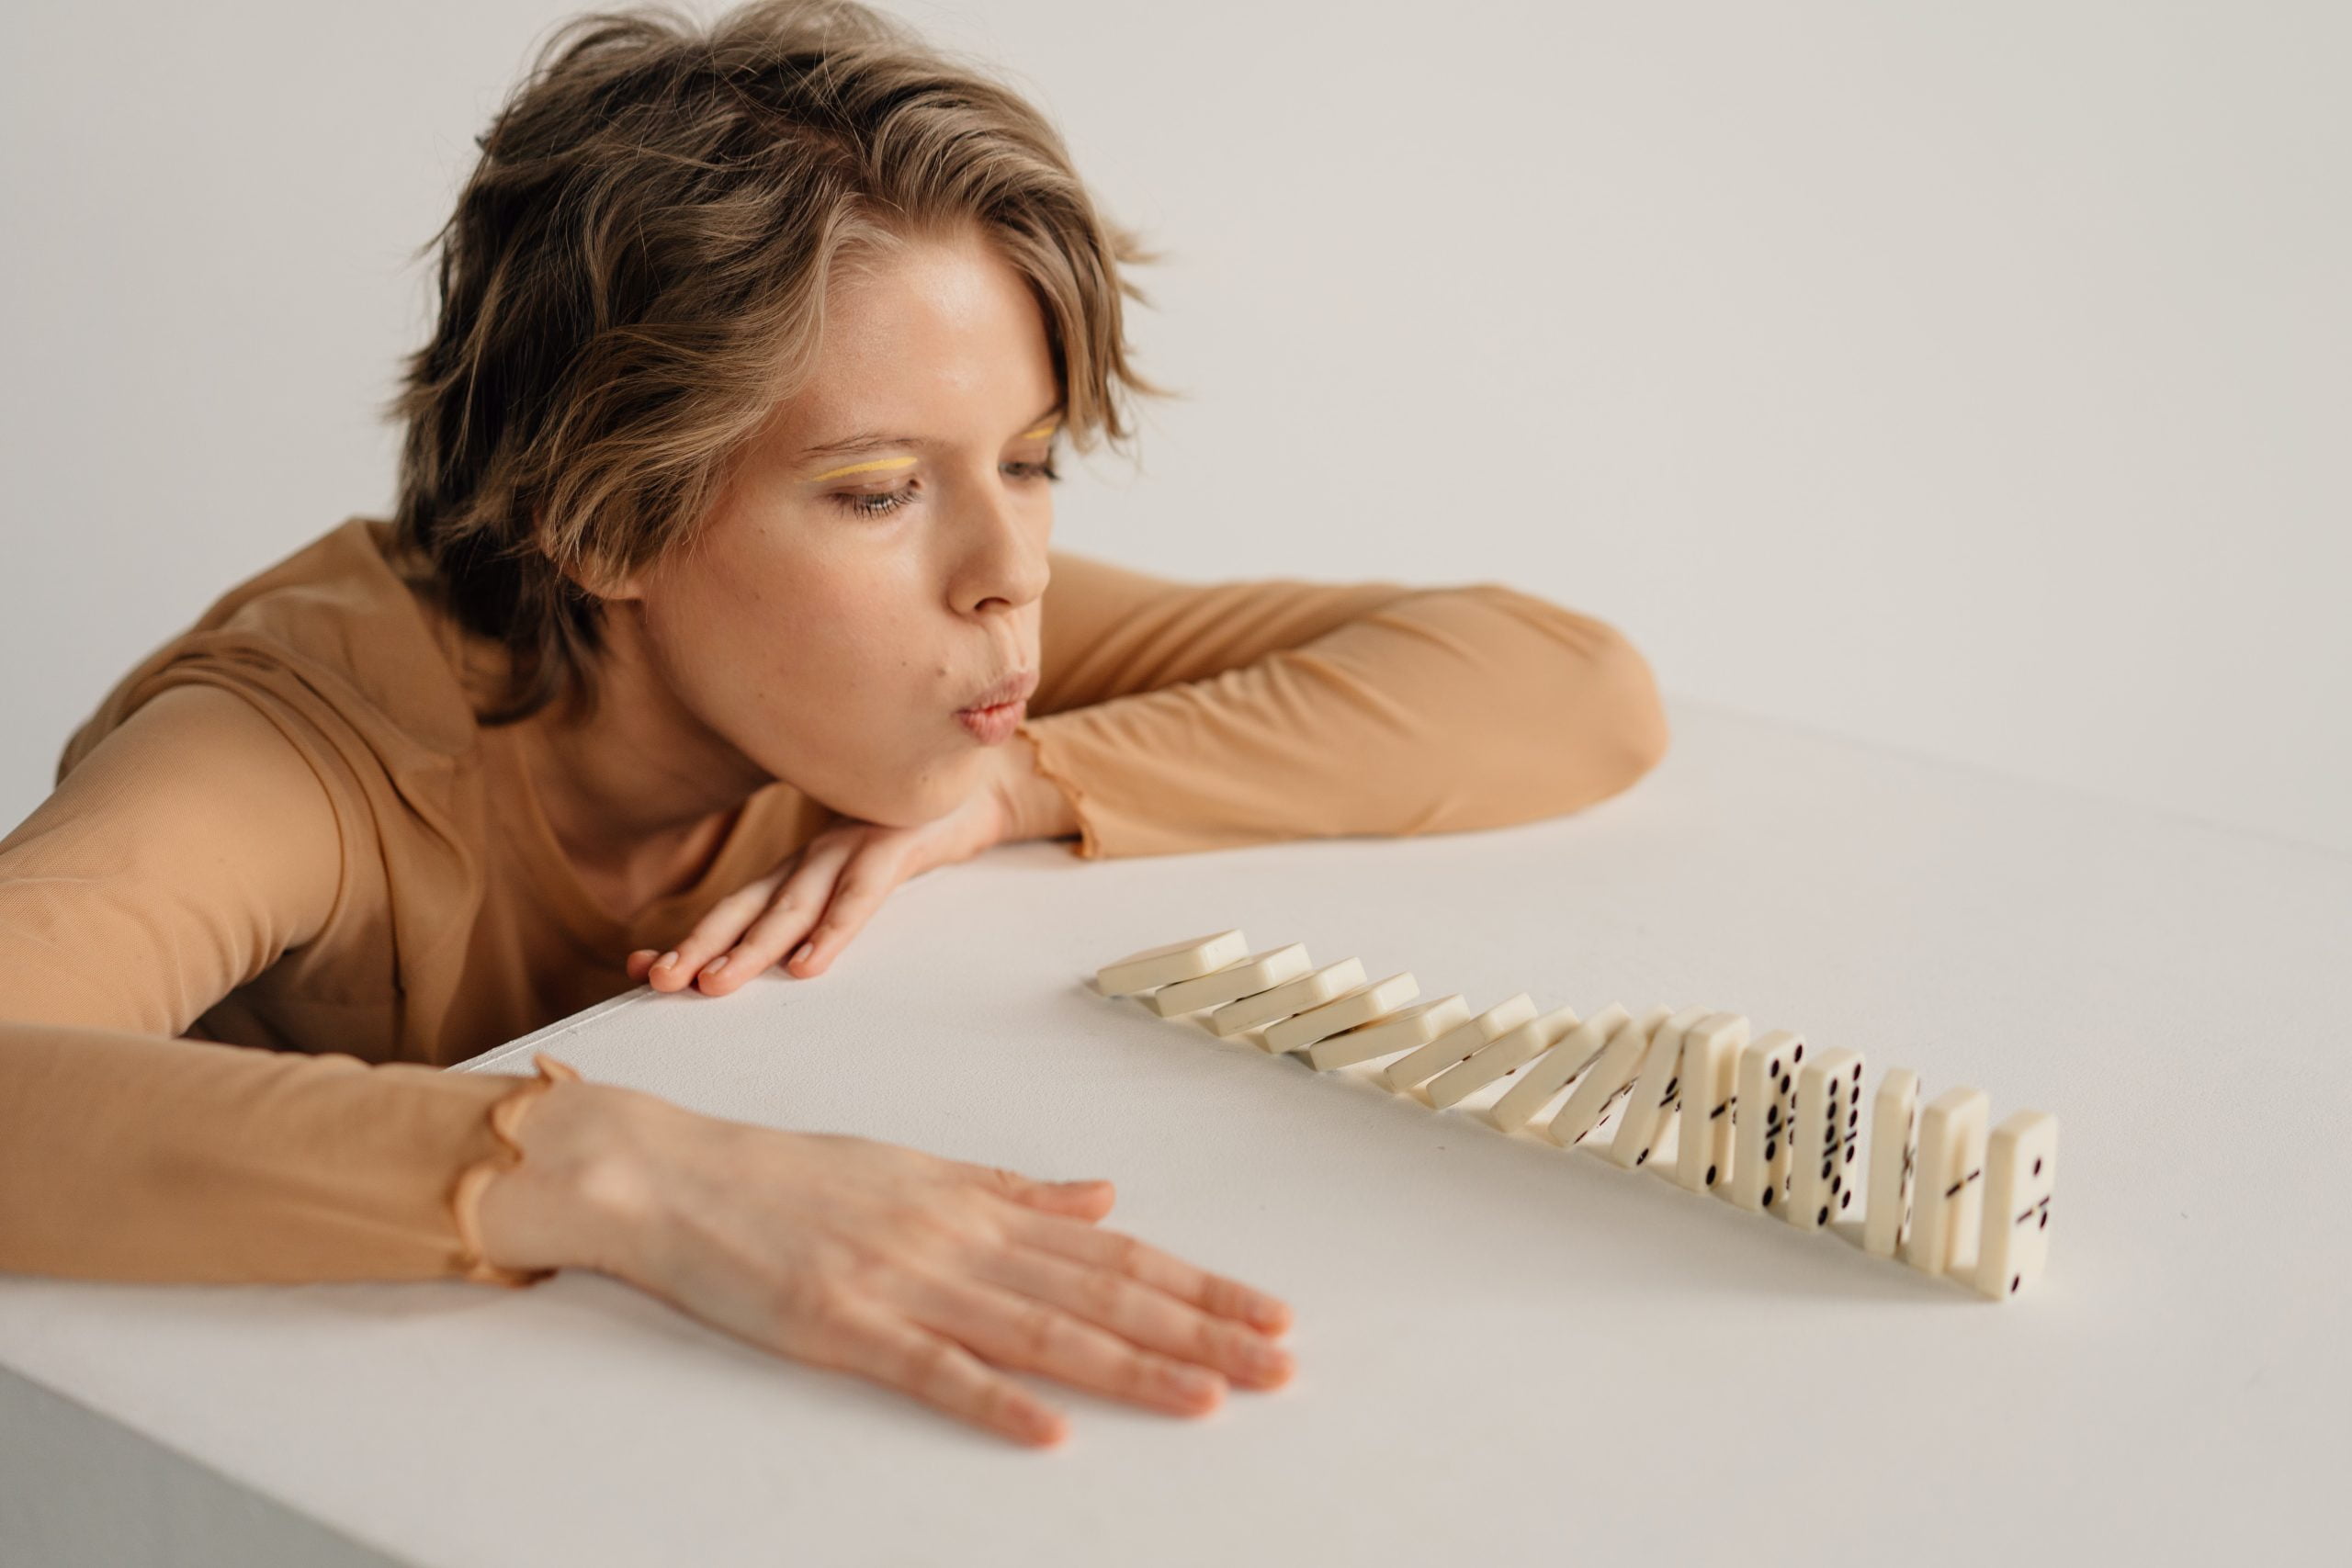 Woman blowing dominoes over into a cascade effect